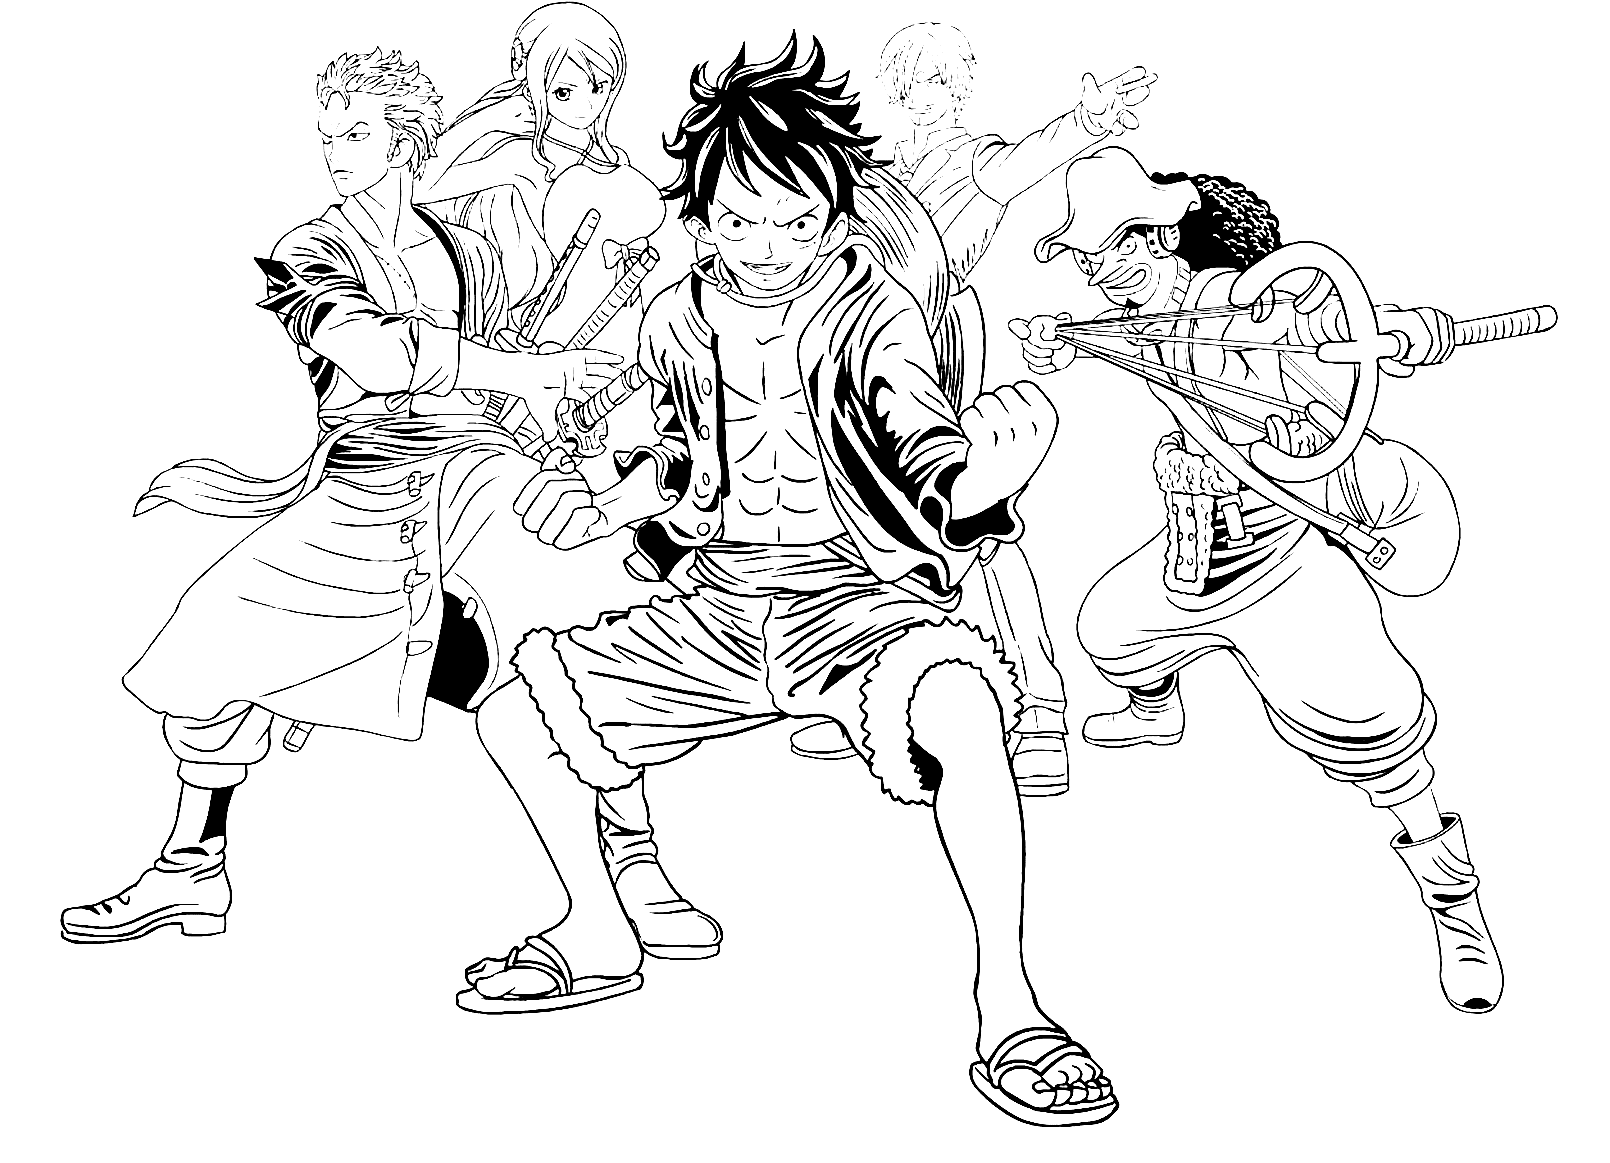 Luffy in One Piece 4 Coloring Pages